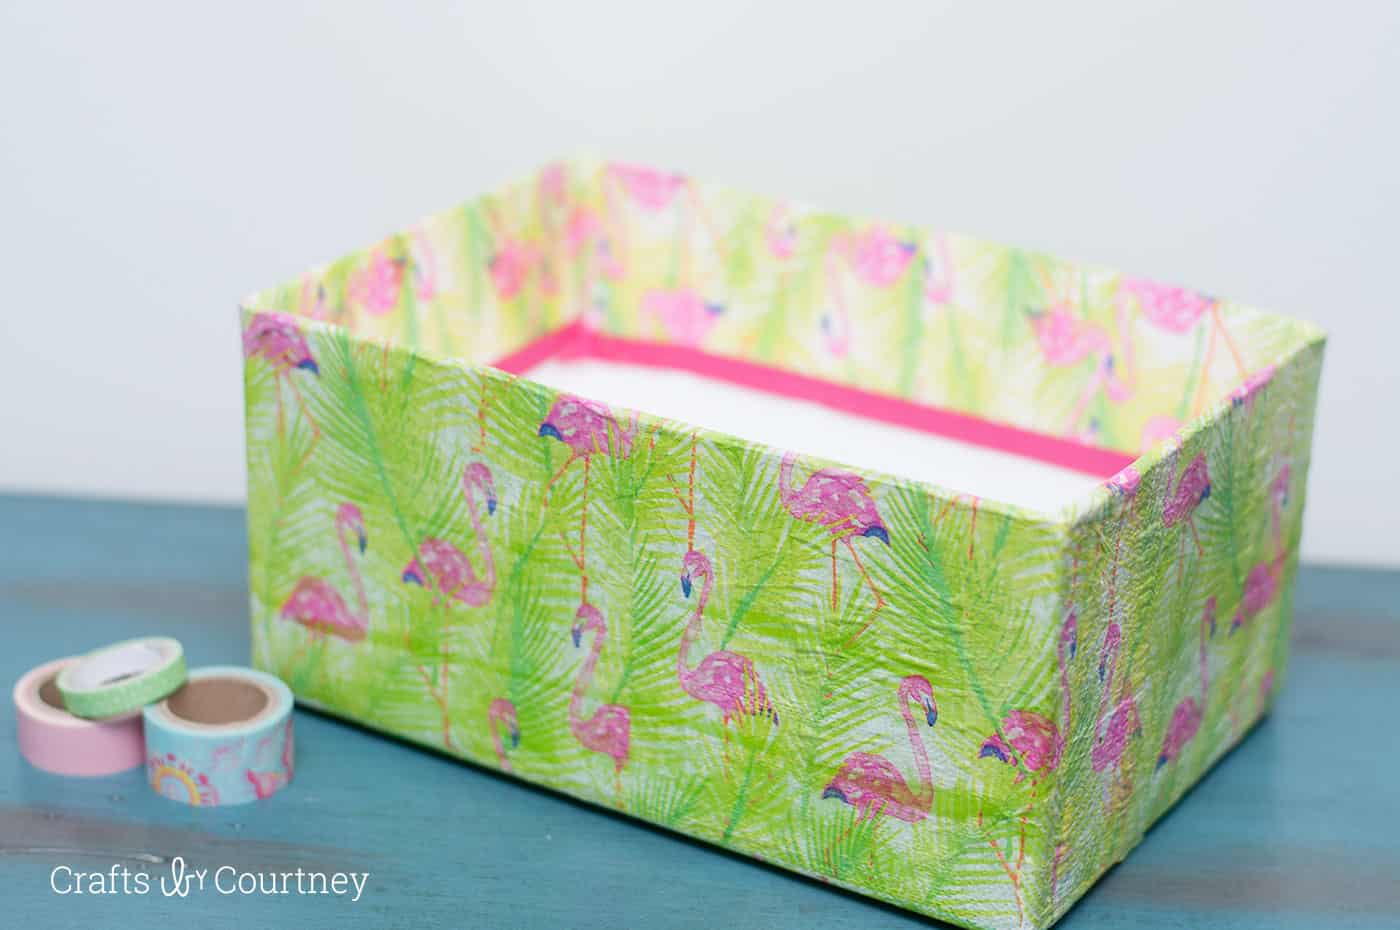 Use napkins from the dollar store along with decoupage medium in this unique box makeover project. It's so inexpensive and easy to do!